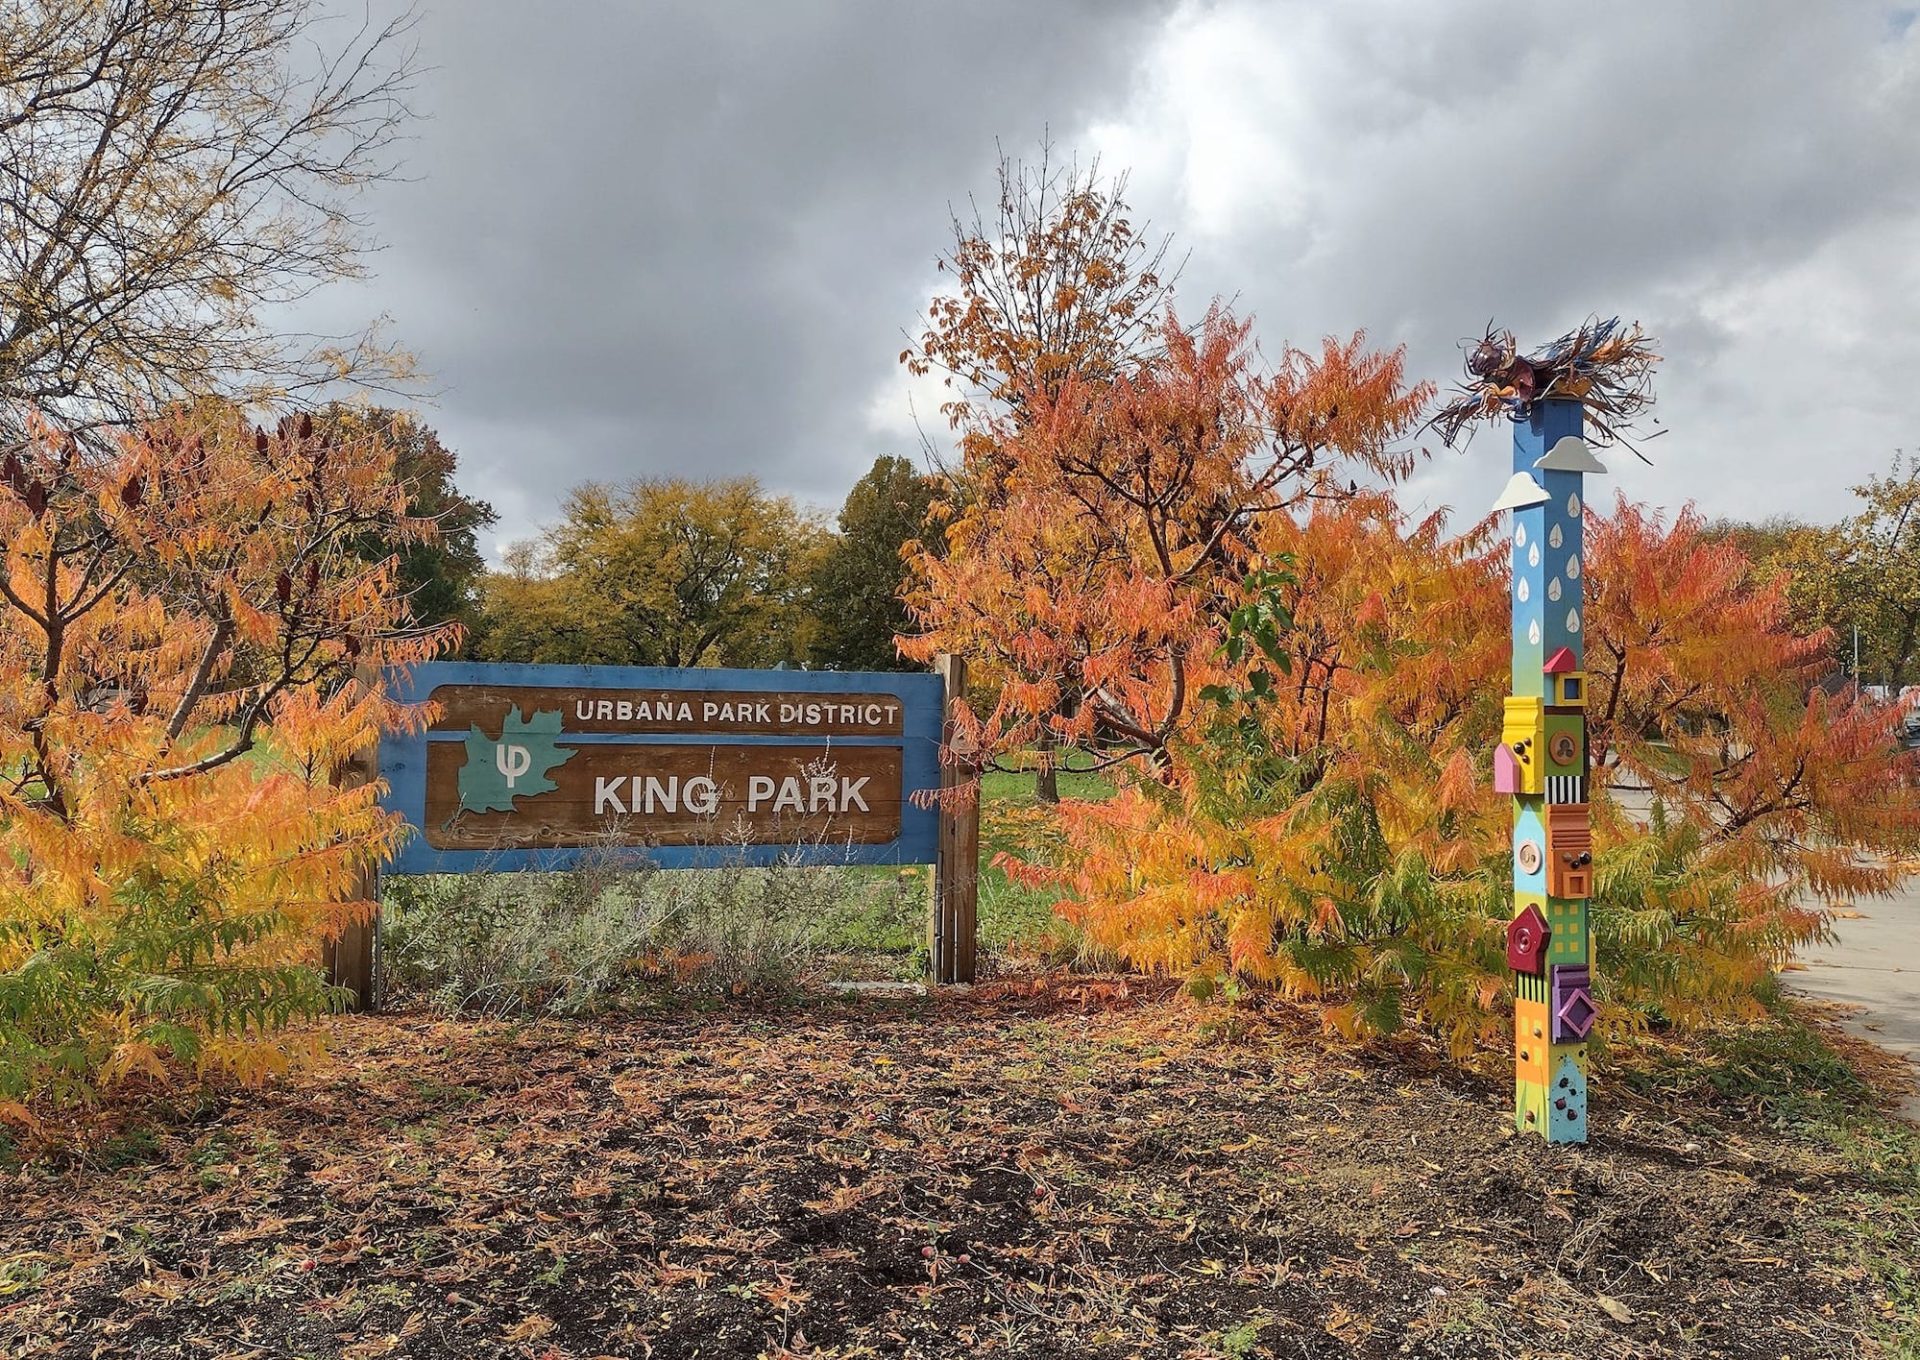 The colorful new peace post--a tall thin painted wood post--stands next to the King Park sign.